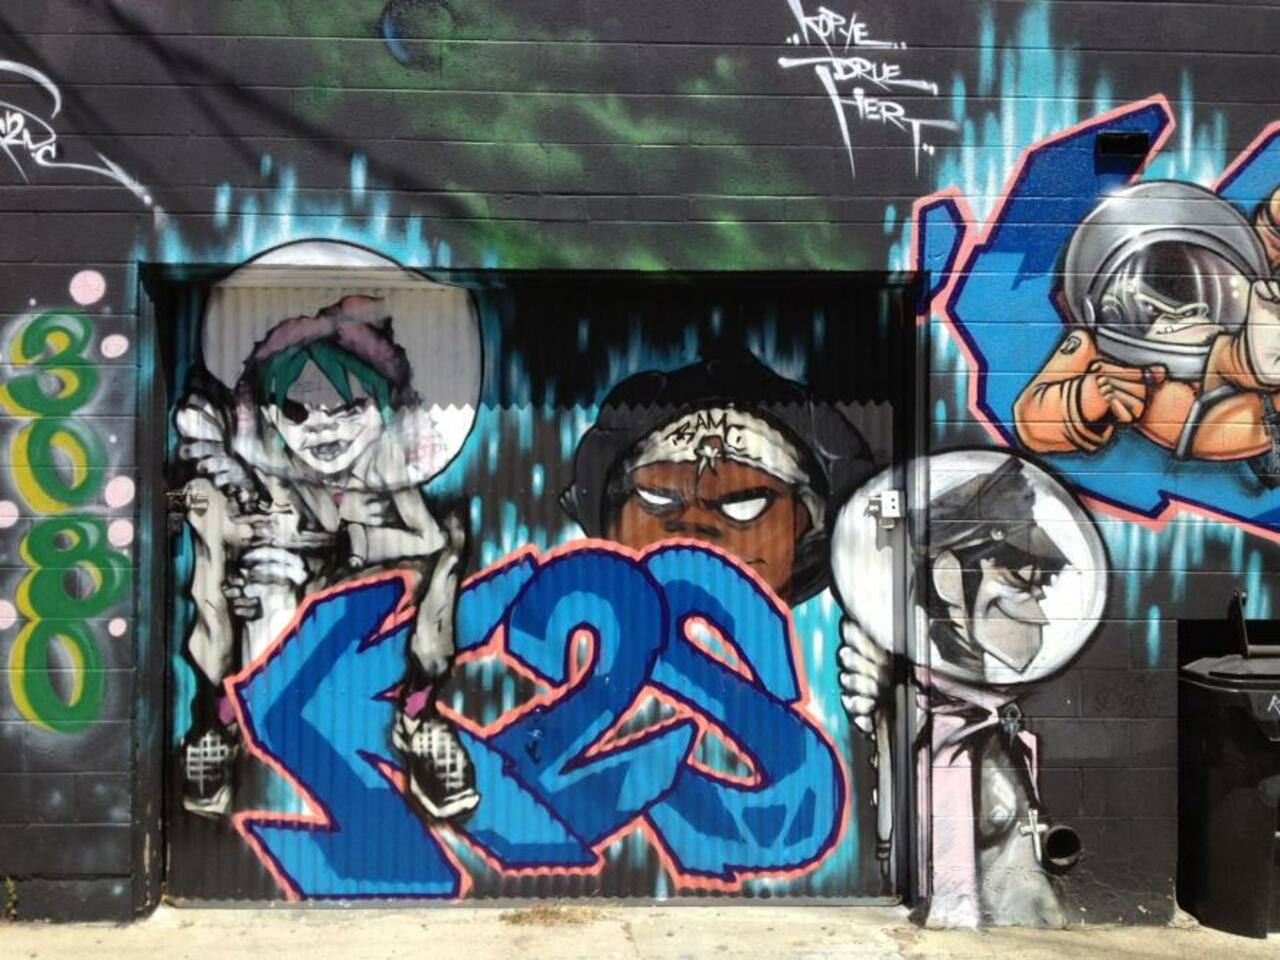 These #Gorillaz live in an alley! #Streetart in #SanDiego. #Graffiti photo by me! #graphicdesign #NorthPark http://t.co/MBDHudato9